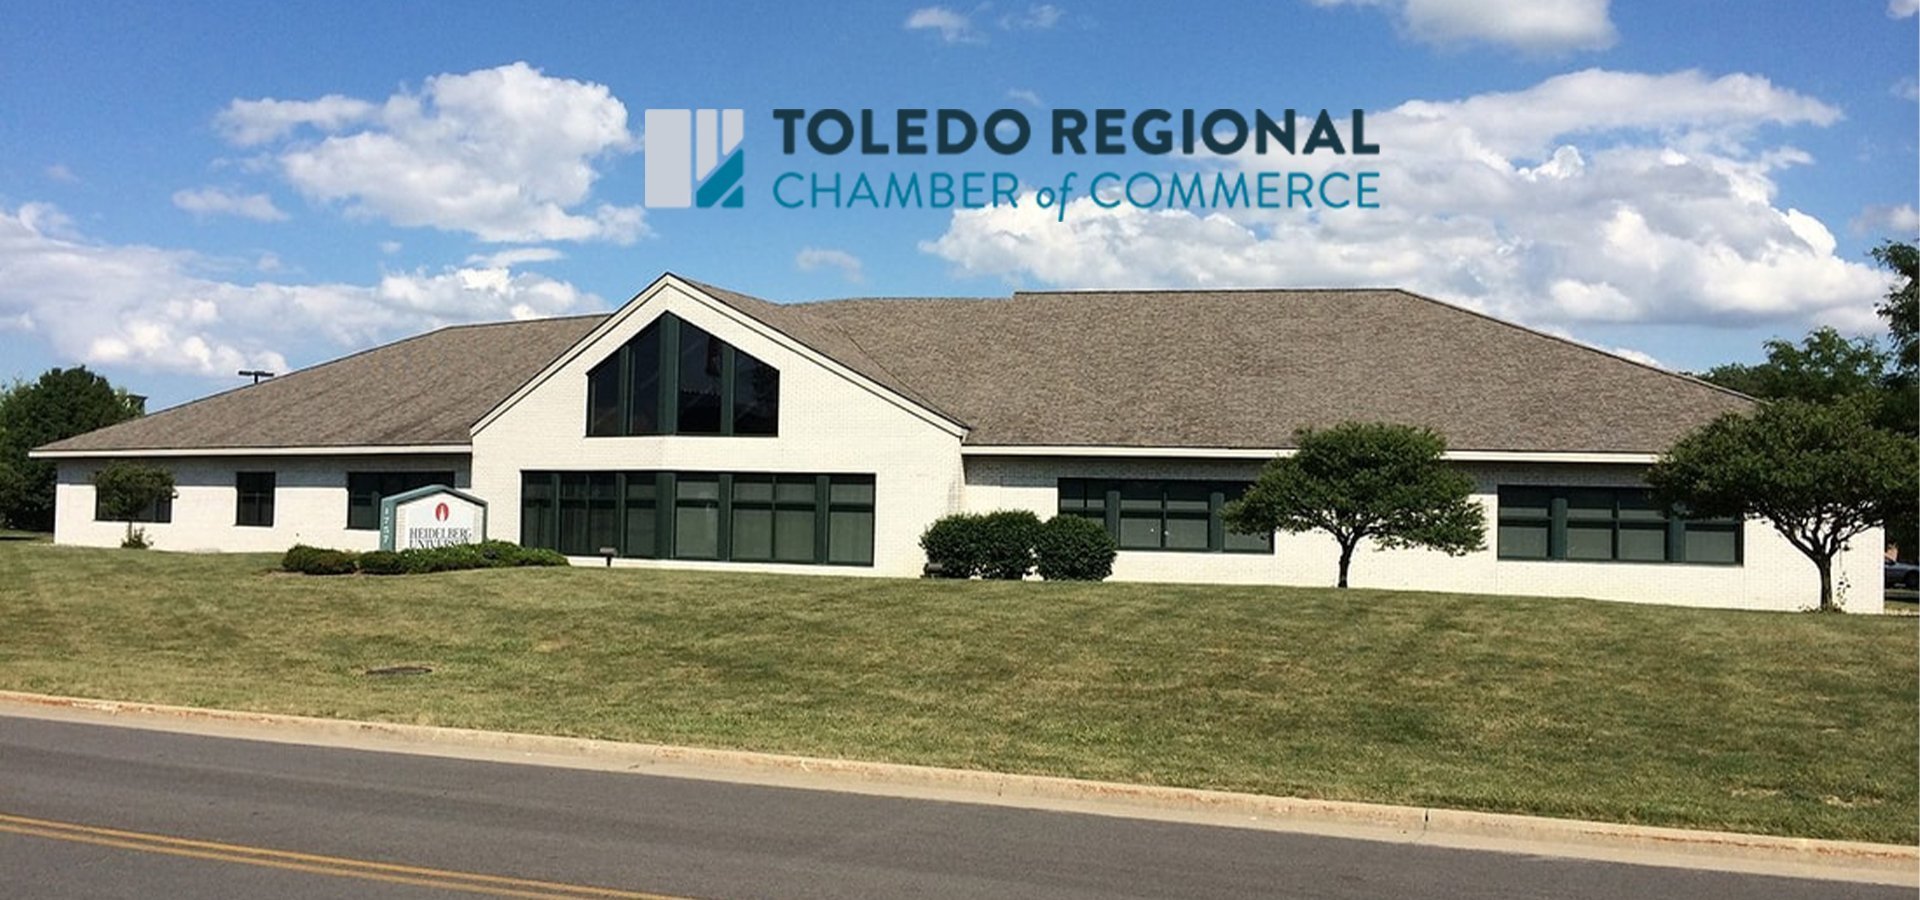 a picture of the toledo regional chamber of commerce causing people to think about the new member spotlight at midwest recovery center